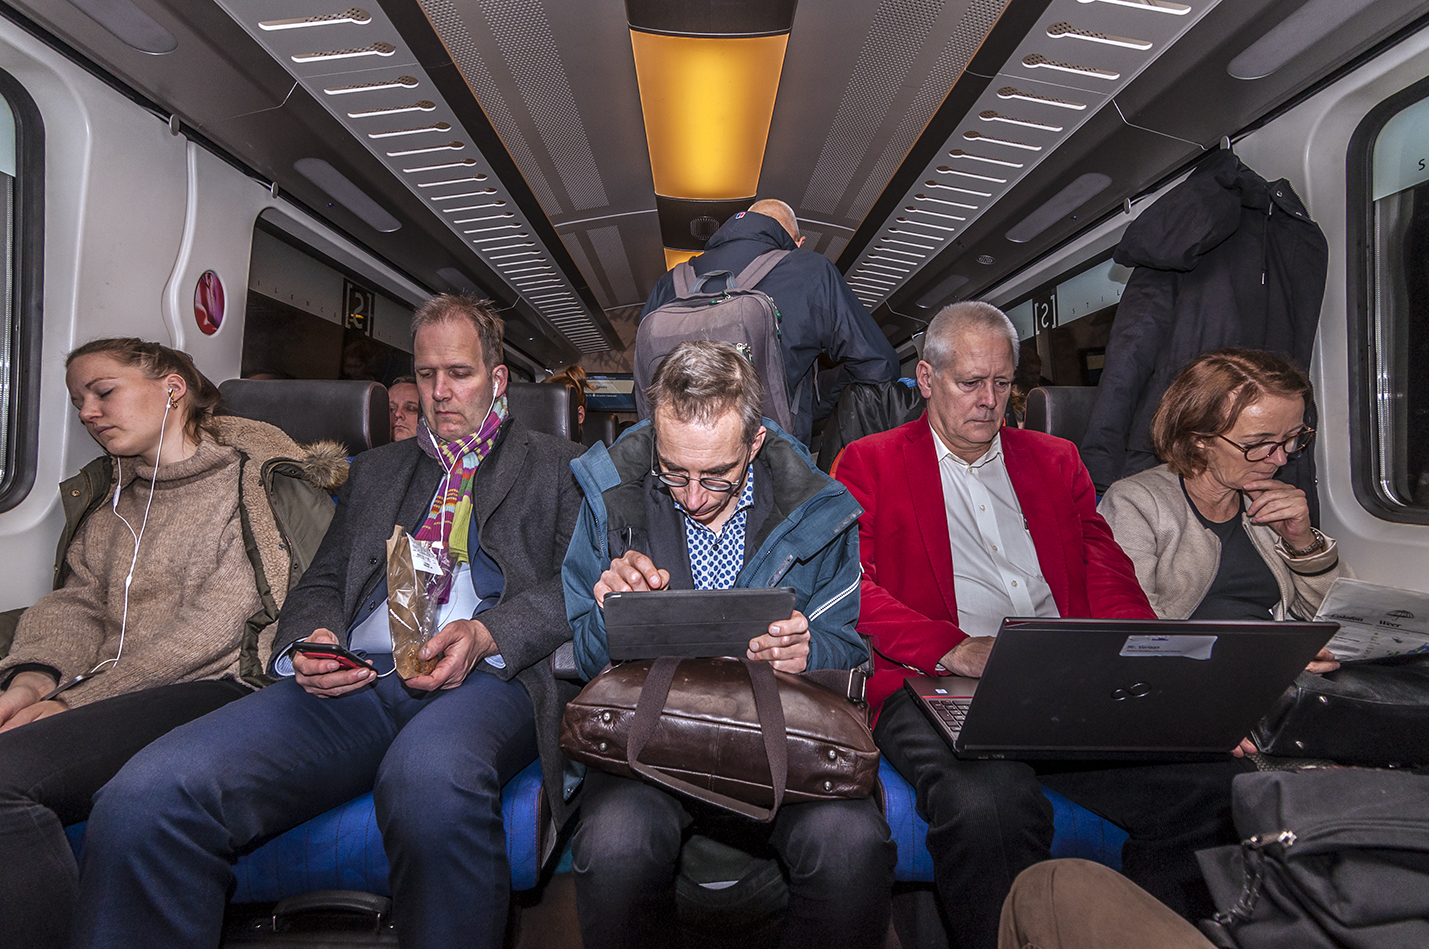 Commuters on a crowded train (The Netherlands)